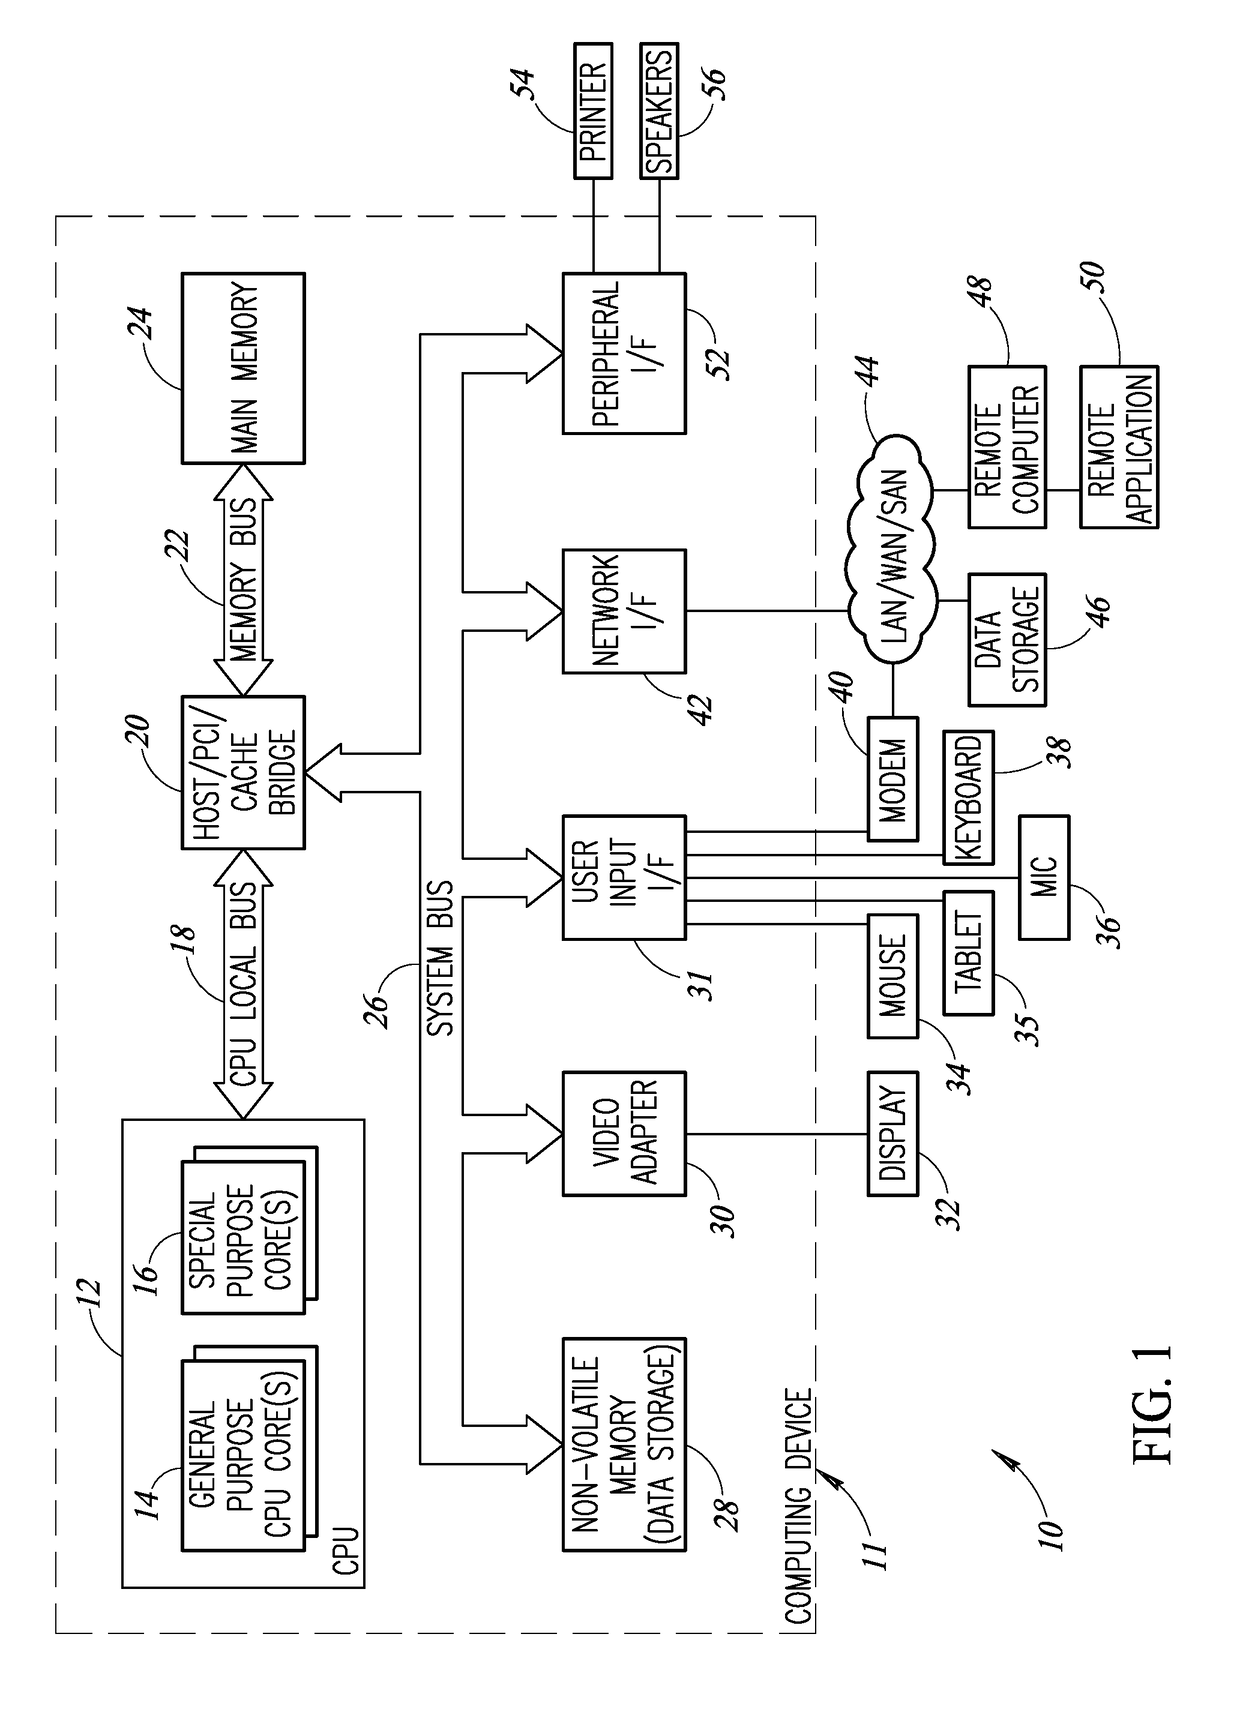 Neural Network Processor Incorporating Inter-Device Connectivity